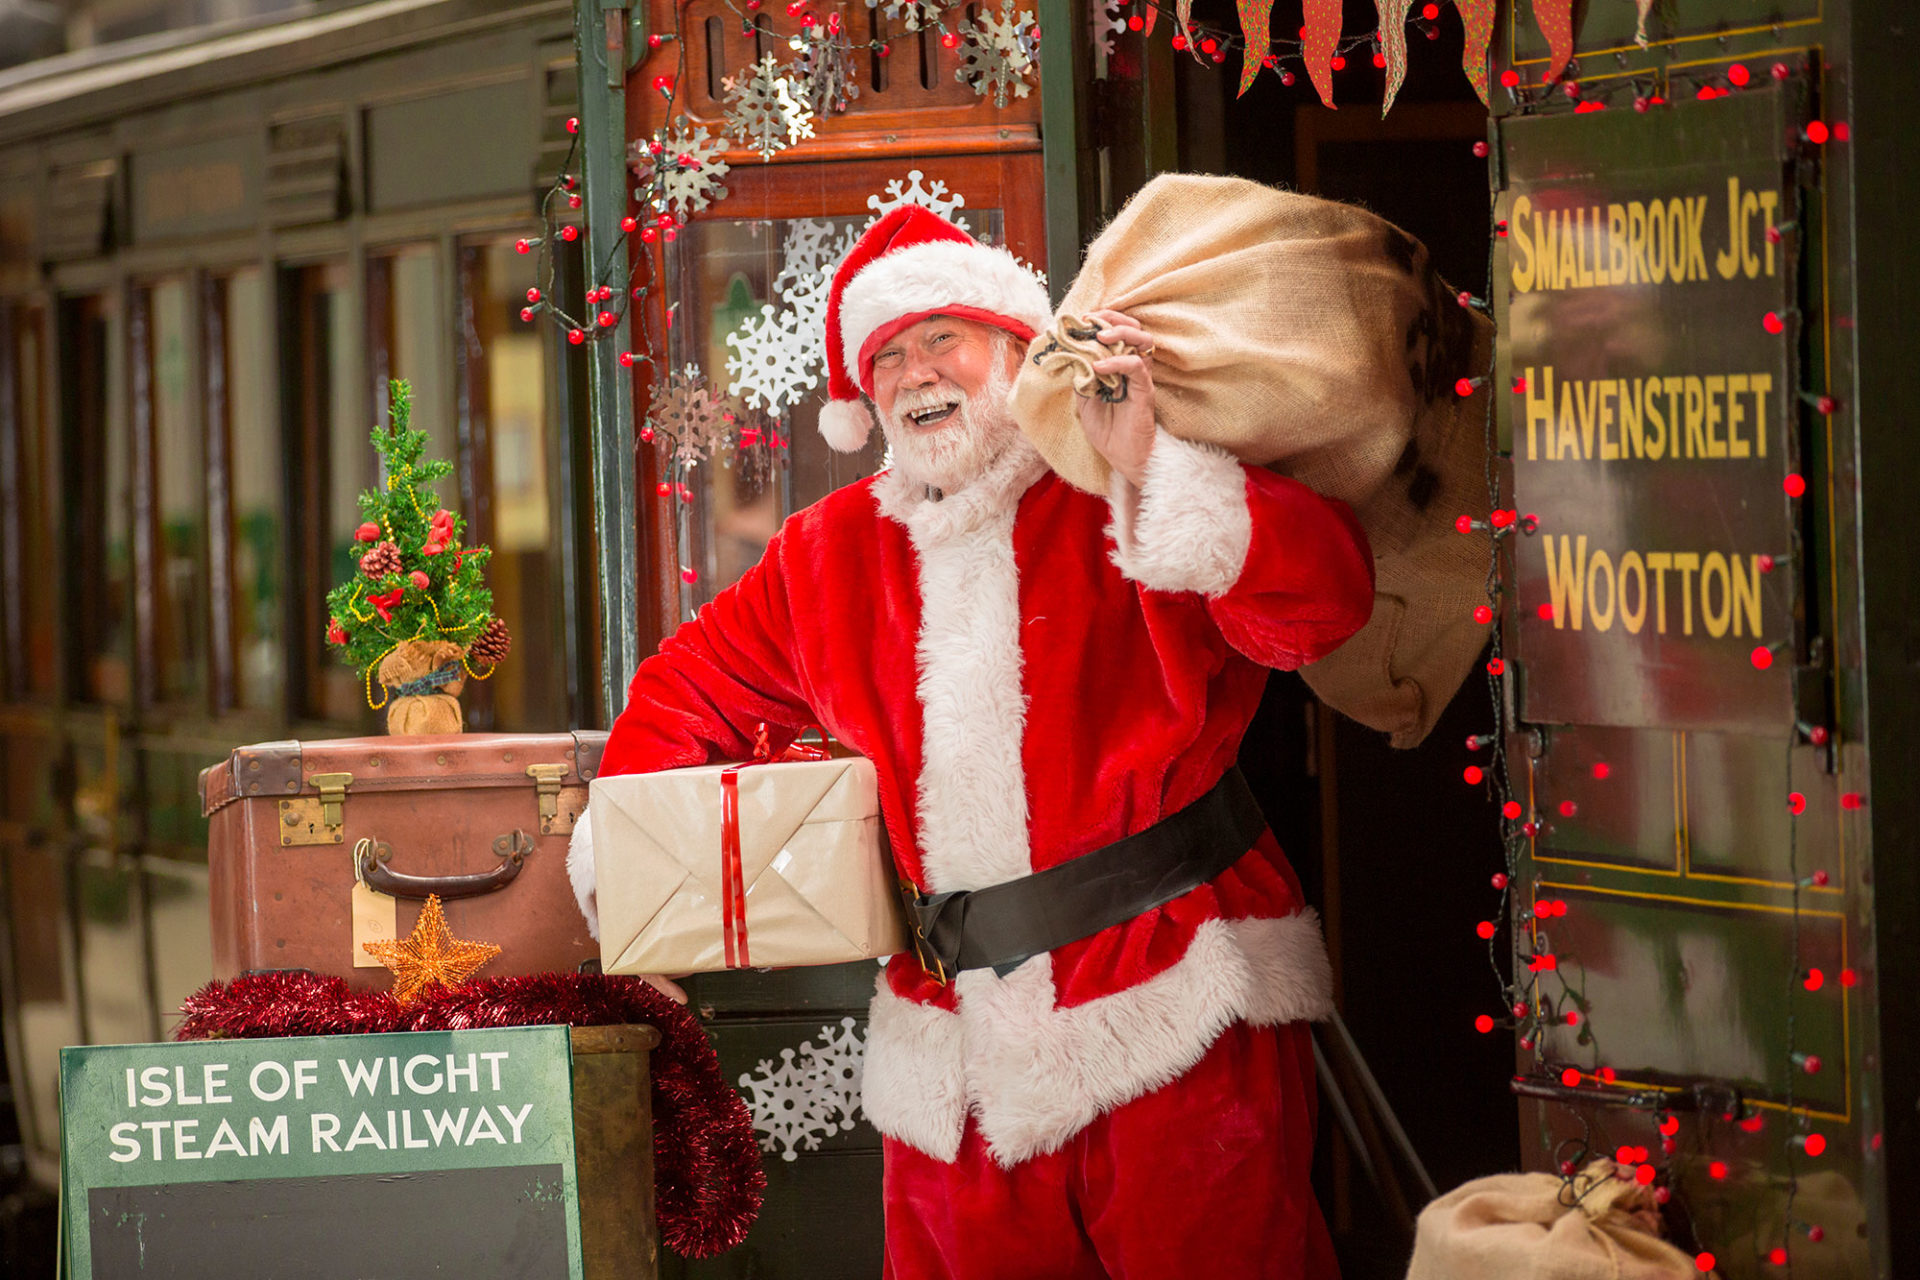 Santa holding presents at The Isle of Wight Steam Railway